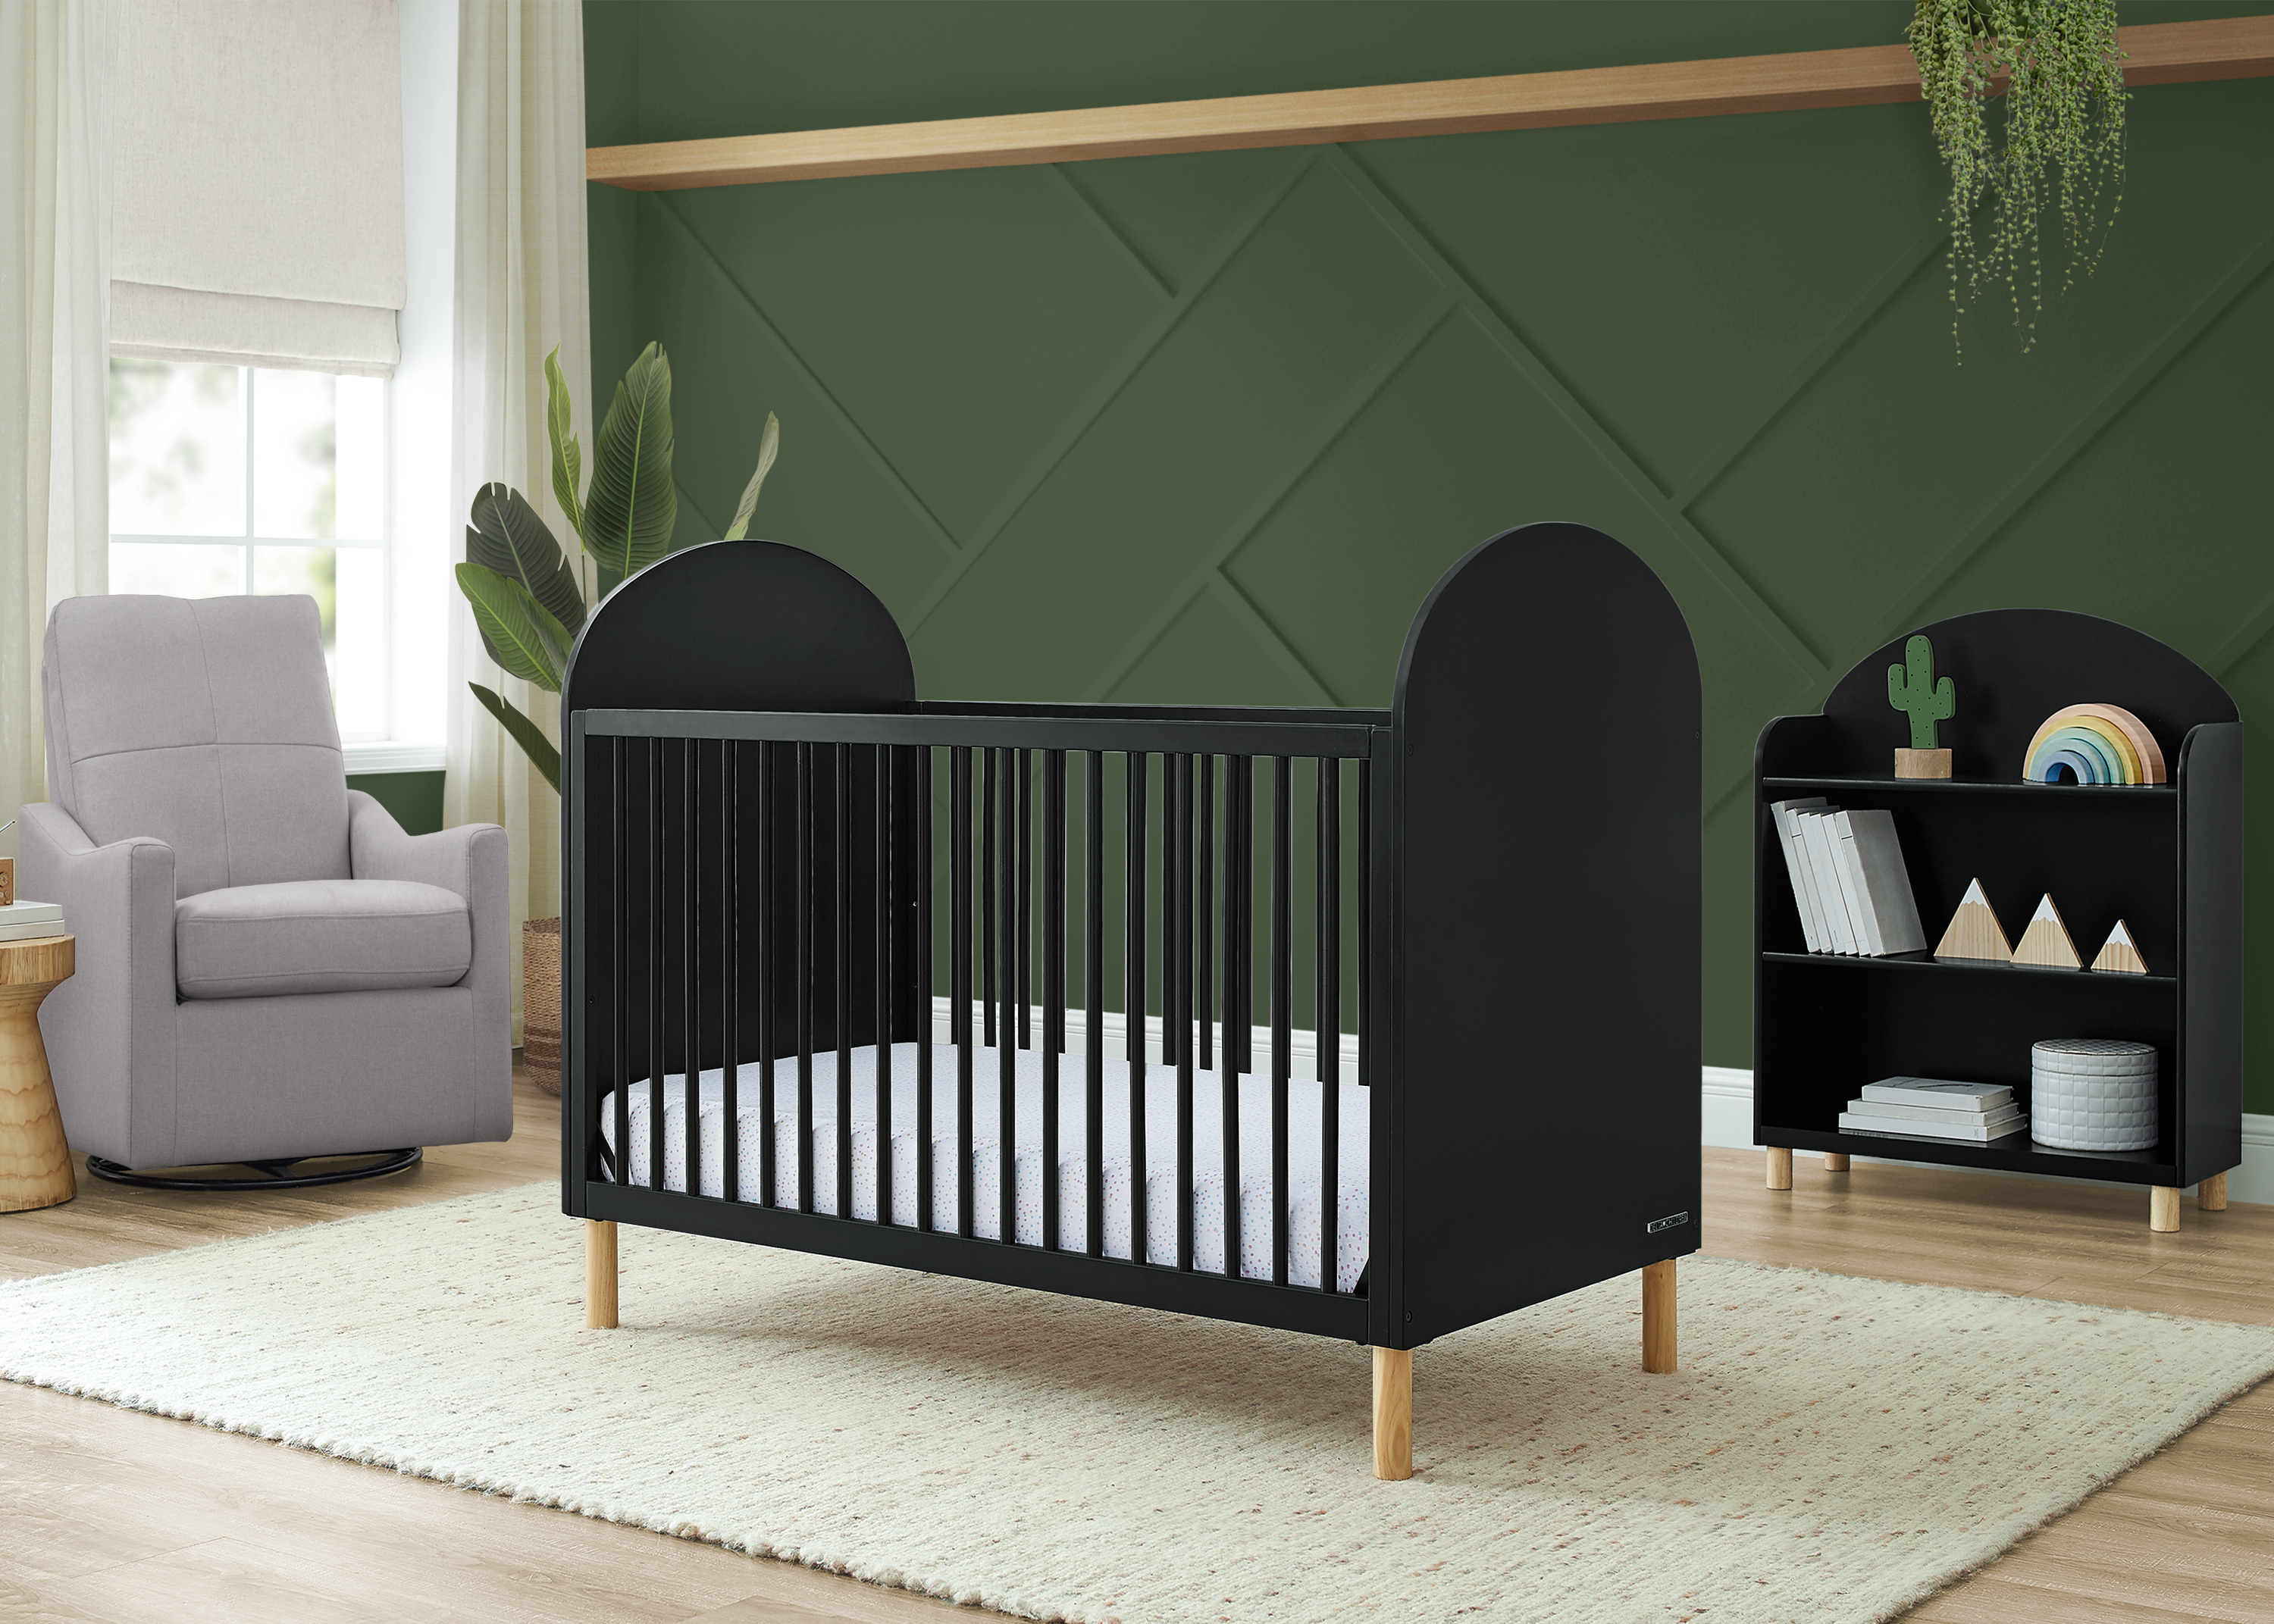 Delta Children Reese 4-in-1 Convertible Crib - Greenguard Gold Certified, Ebony/Natural - image 4 of 17